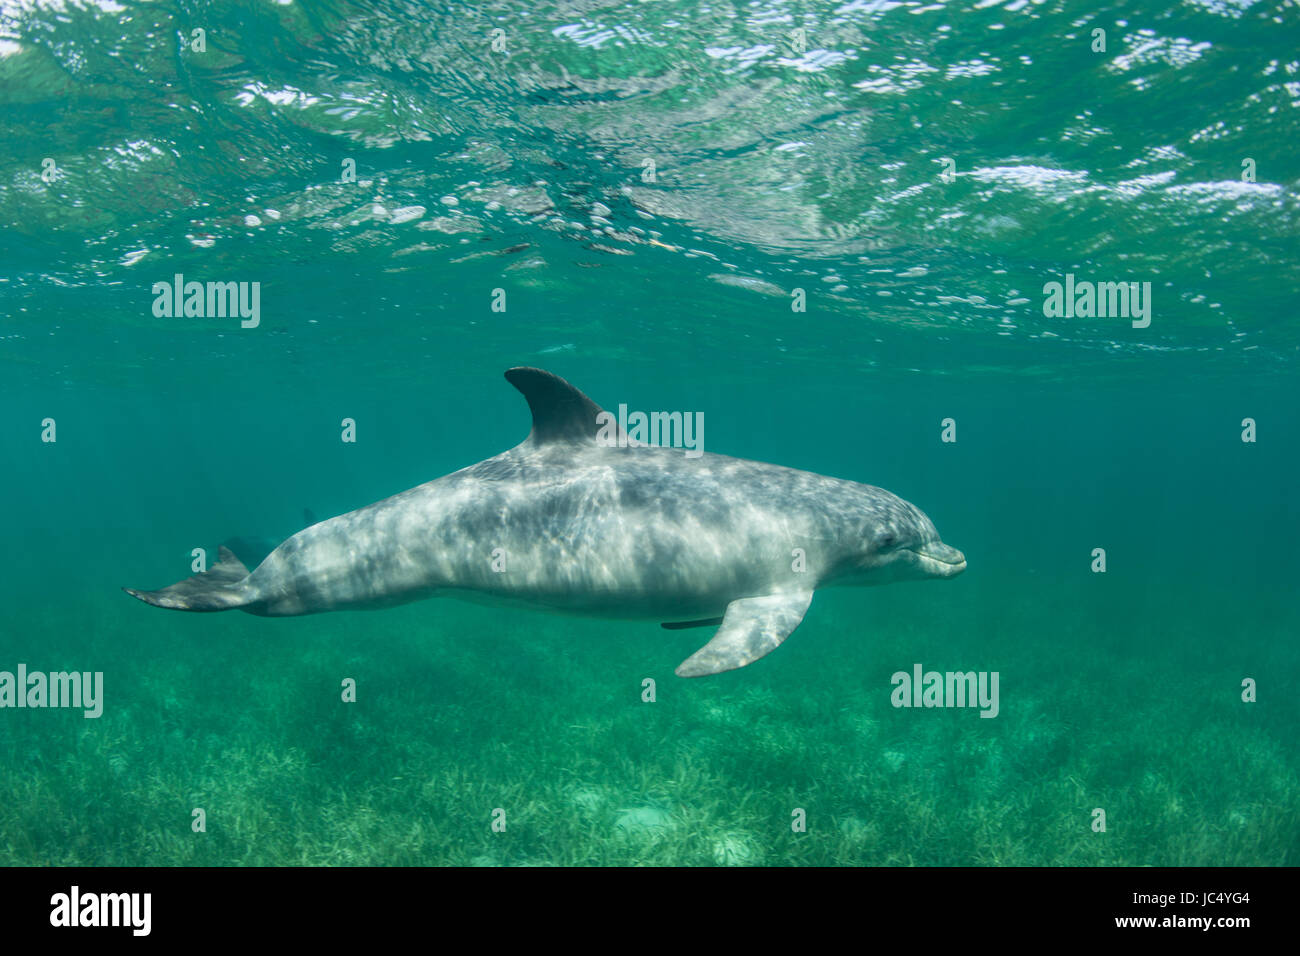 A Bottlenose dolphin swims over a seagrass meadow in Turneffe Atoll off the coast of Belize. This species is an extremely intelligent marine mammal. Stock Photo